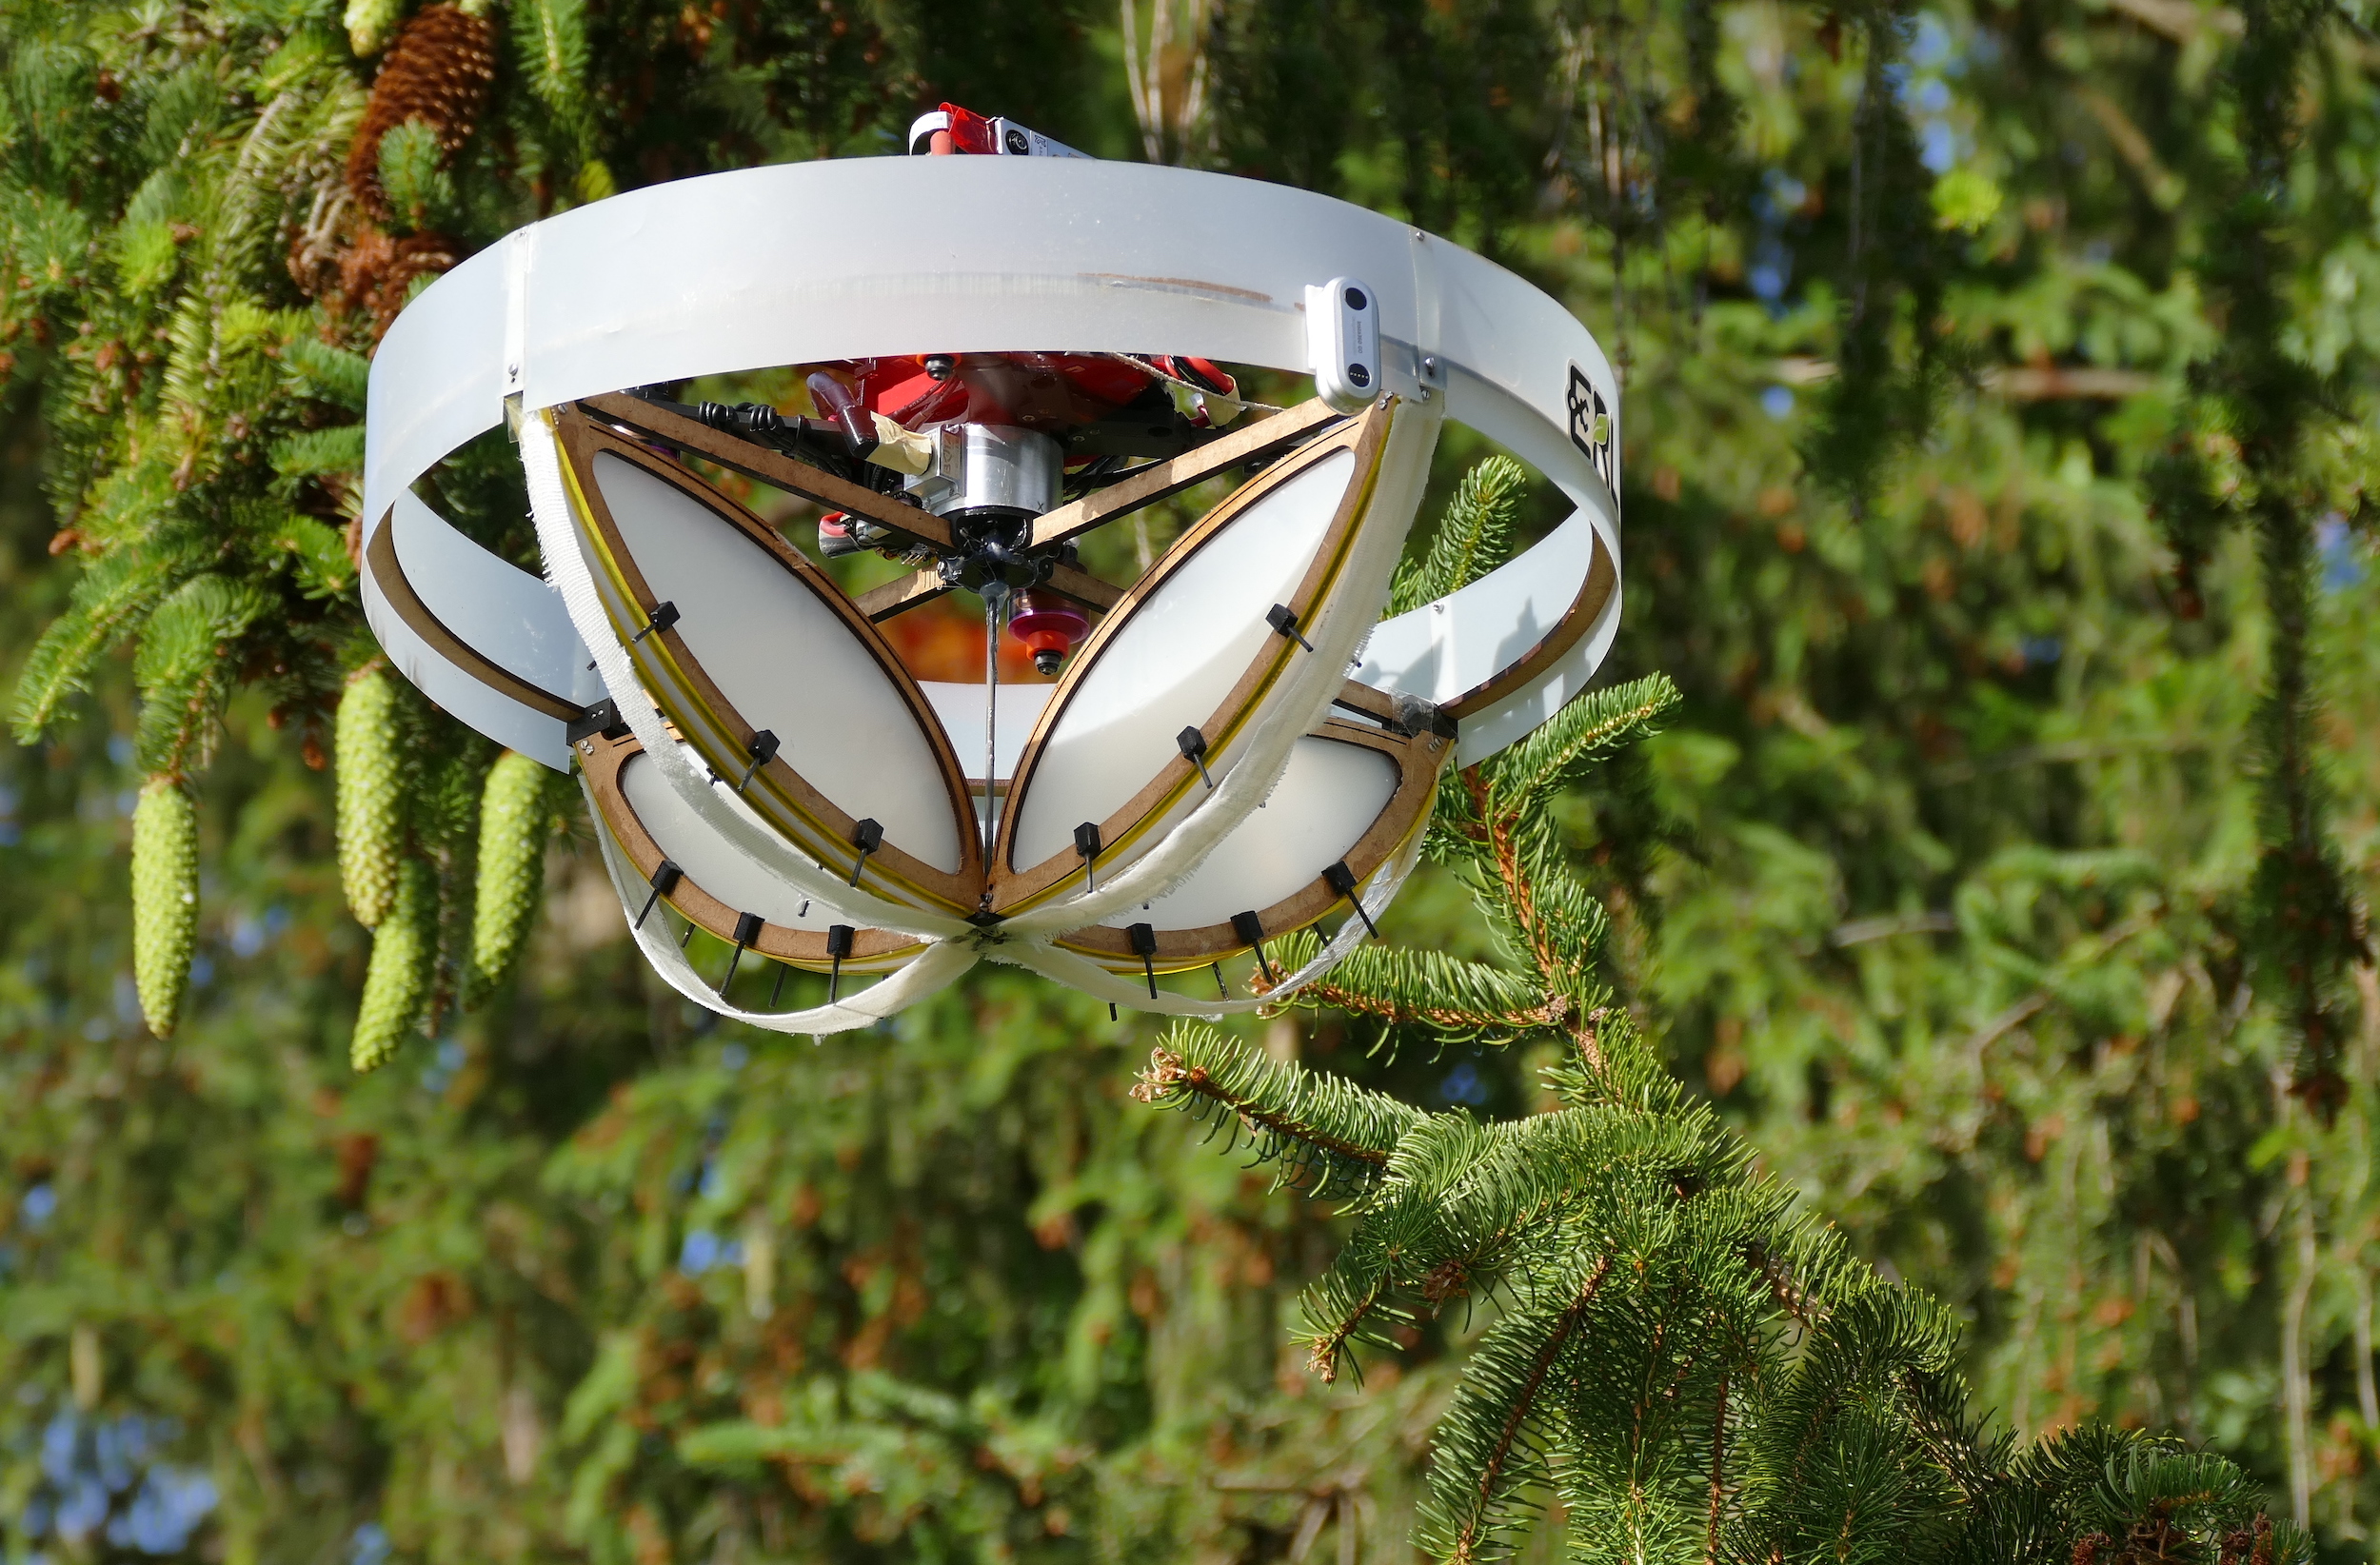 gentle drone collects loose DNA from swaying tree branches